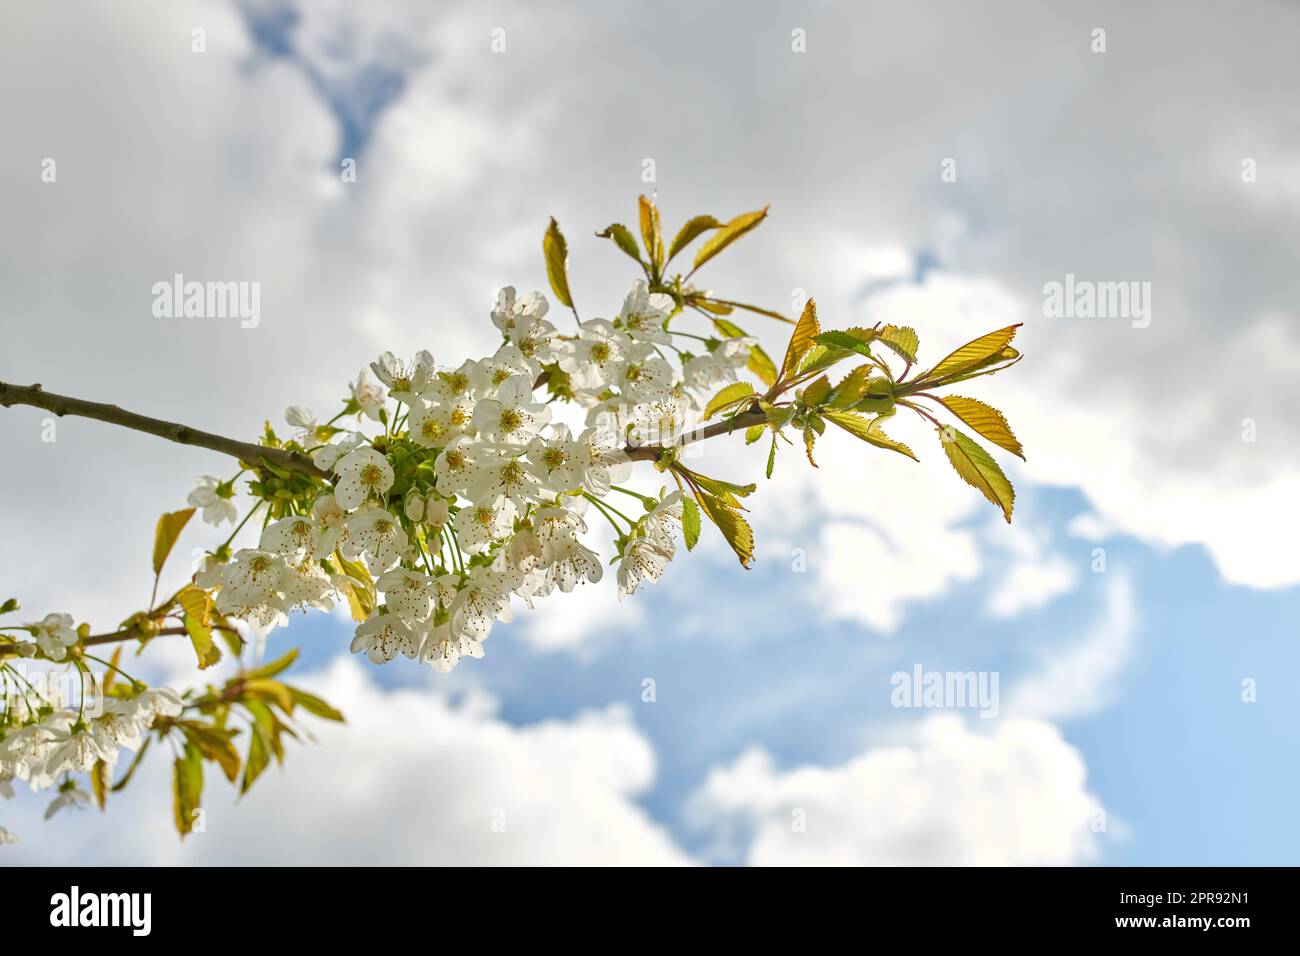 Cherry flowers blossom on tree branch against a cloudy sky looking relaxing in spring. This beautiful edible plant grows in a peaceful garden out in nature. Close up of black cherry Prunus serotina Stock Photo